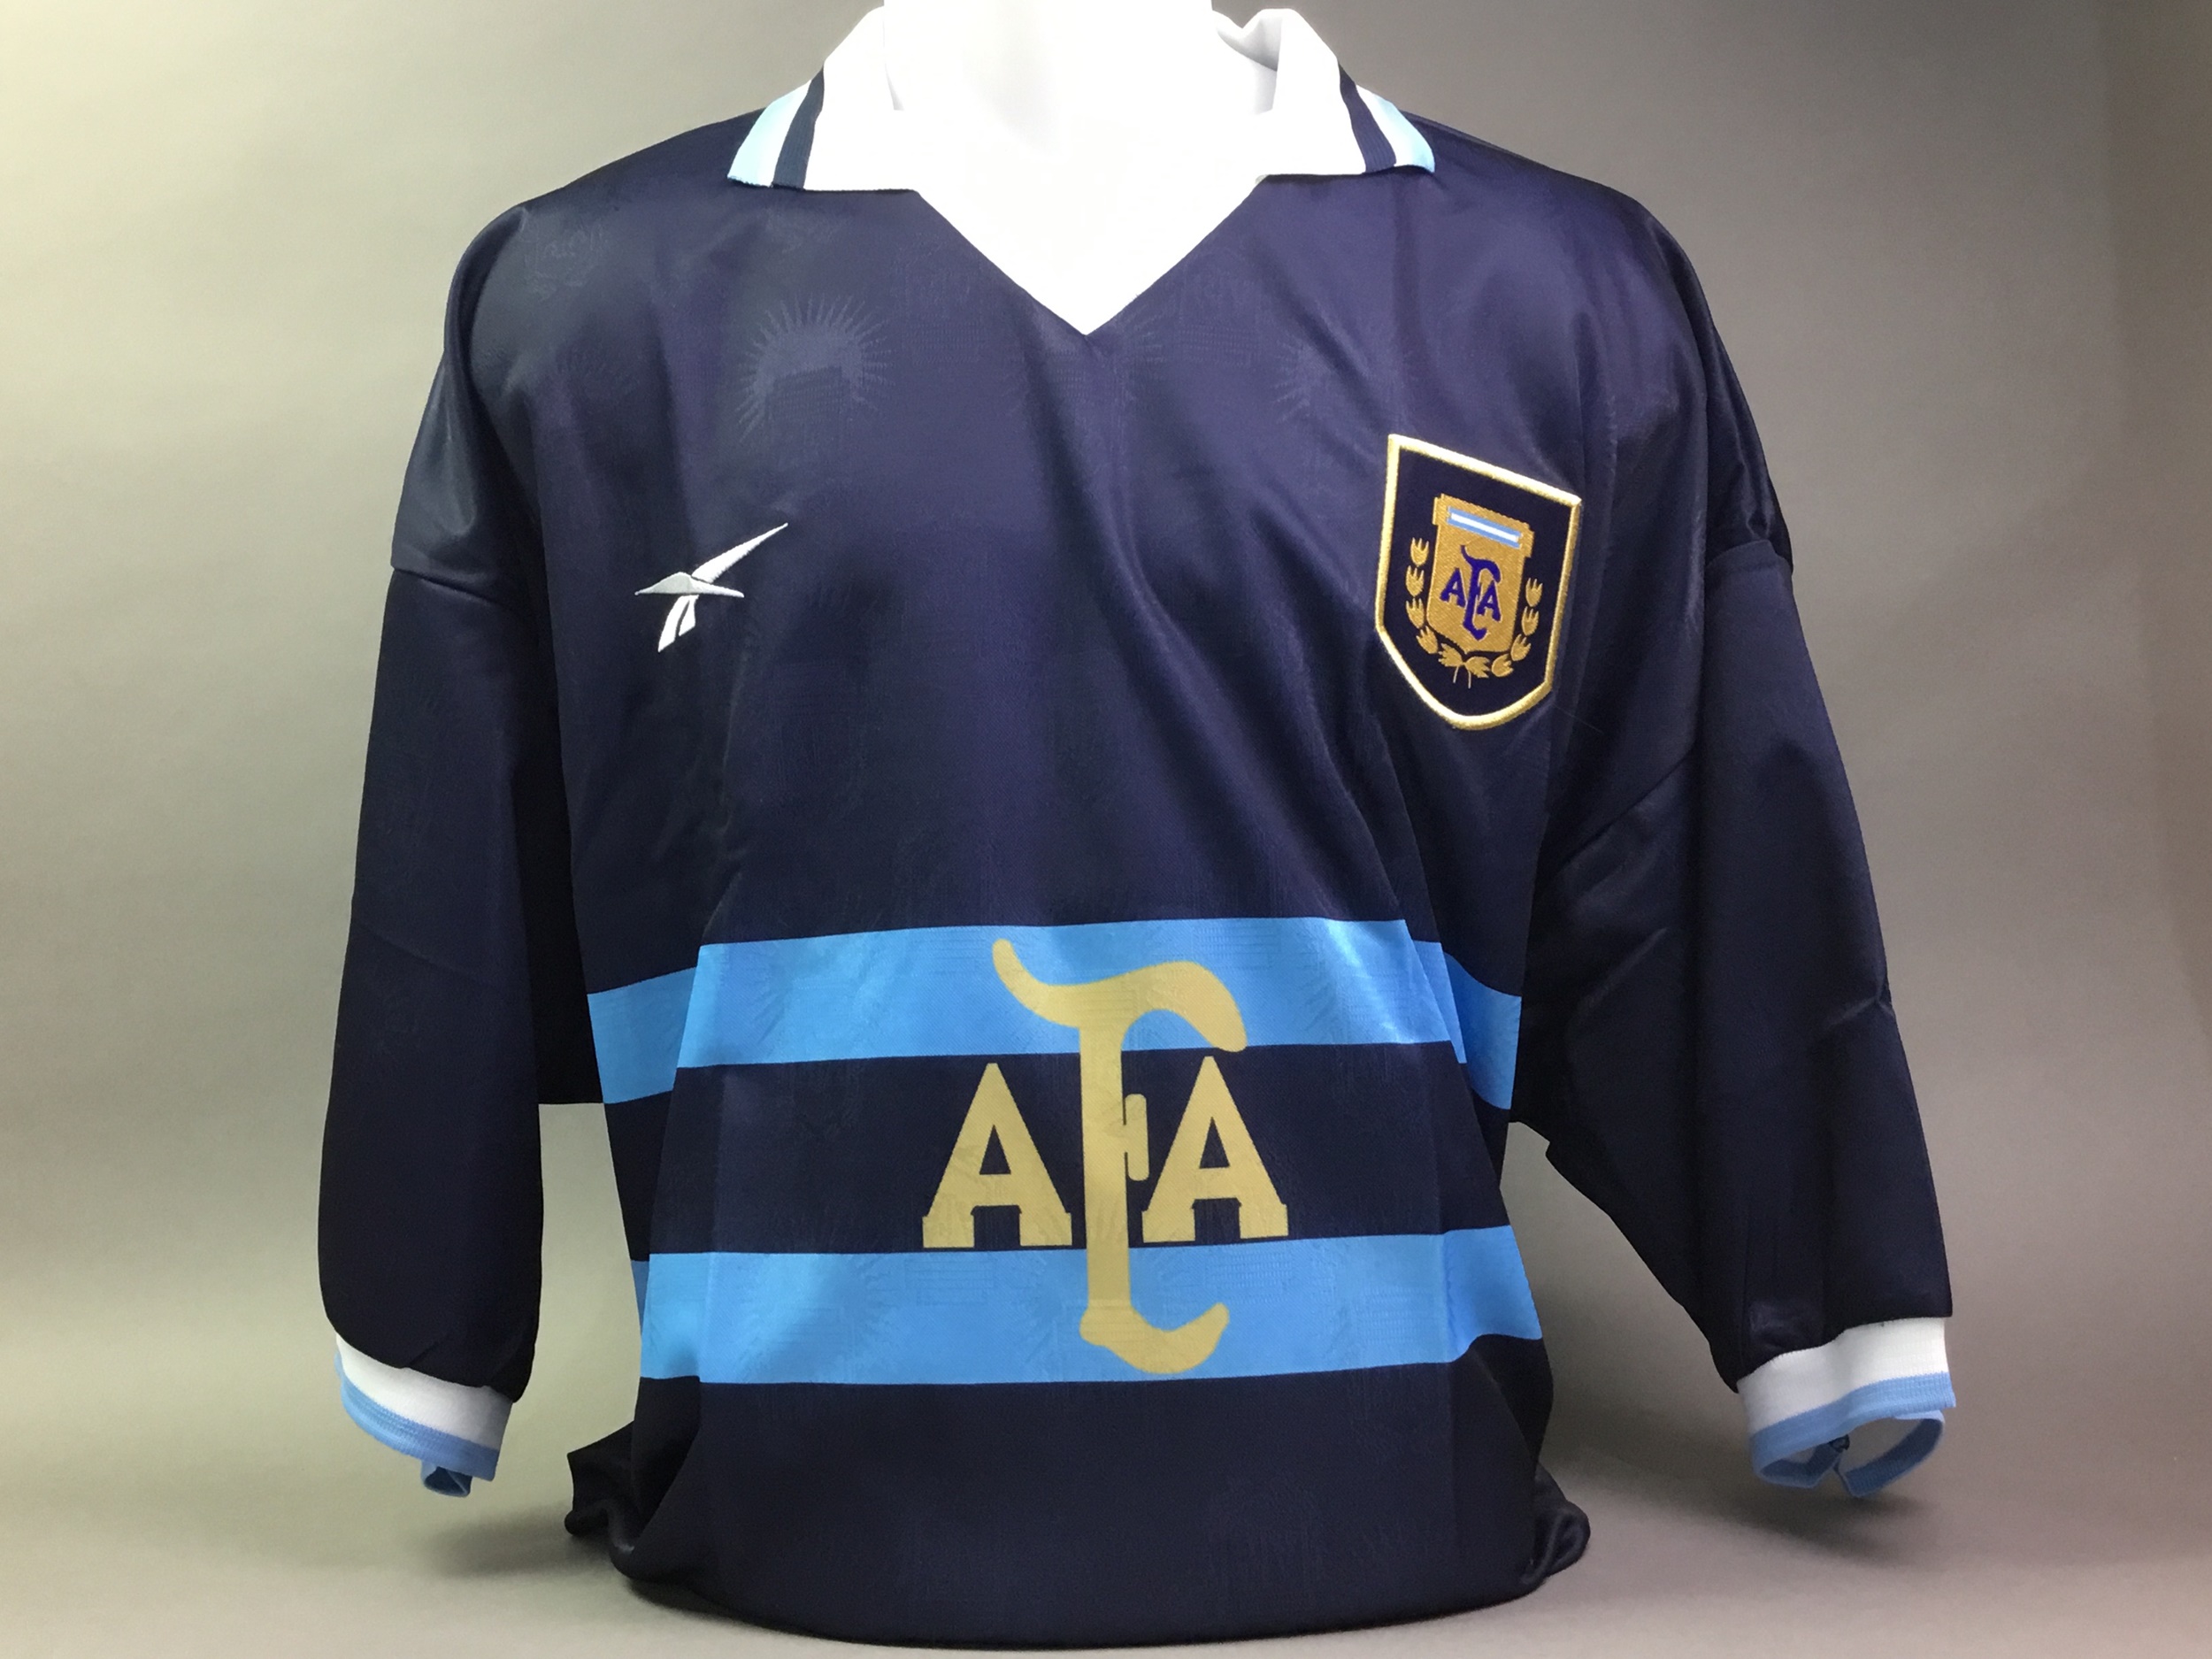 ARGENTINA REPLICA 2000/01 HOME & AWAY JERSEYS - Image 3 of 4